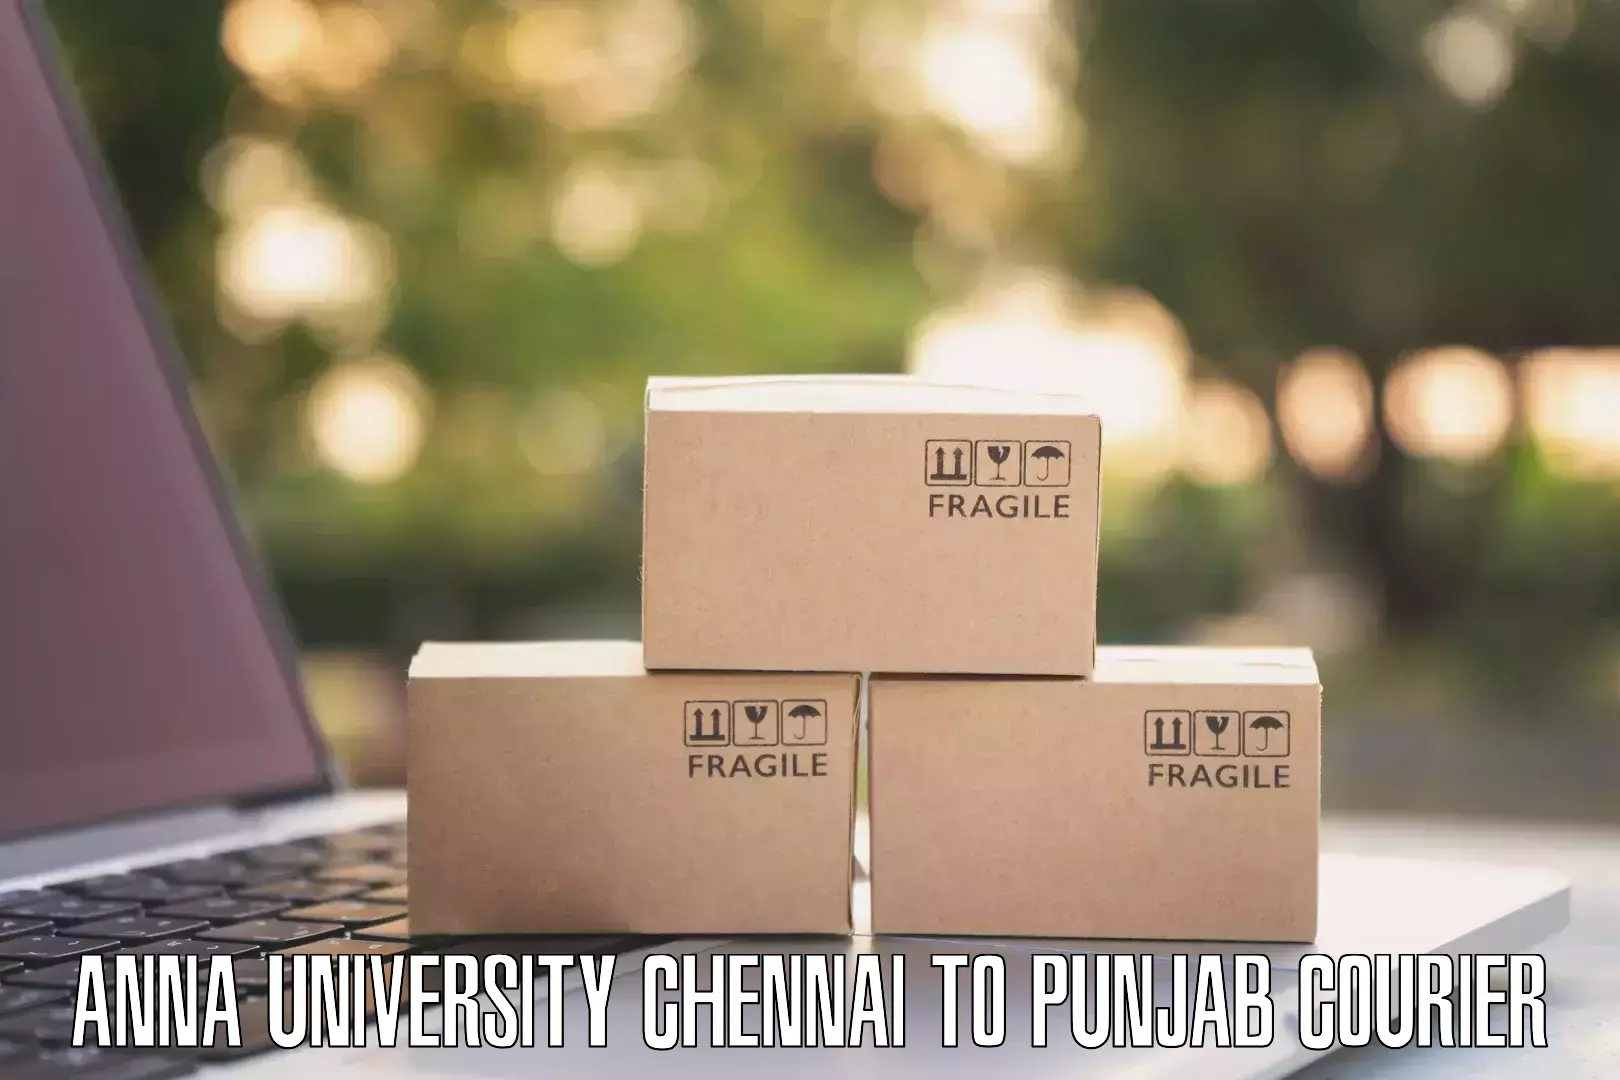 Local delivery service Anna University Chennai to Punjab